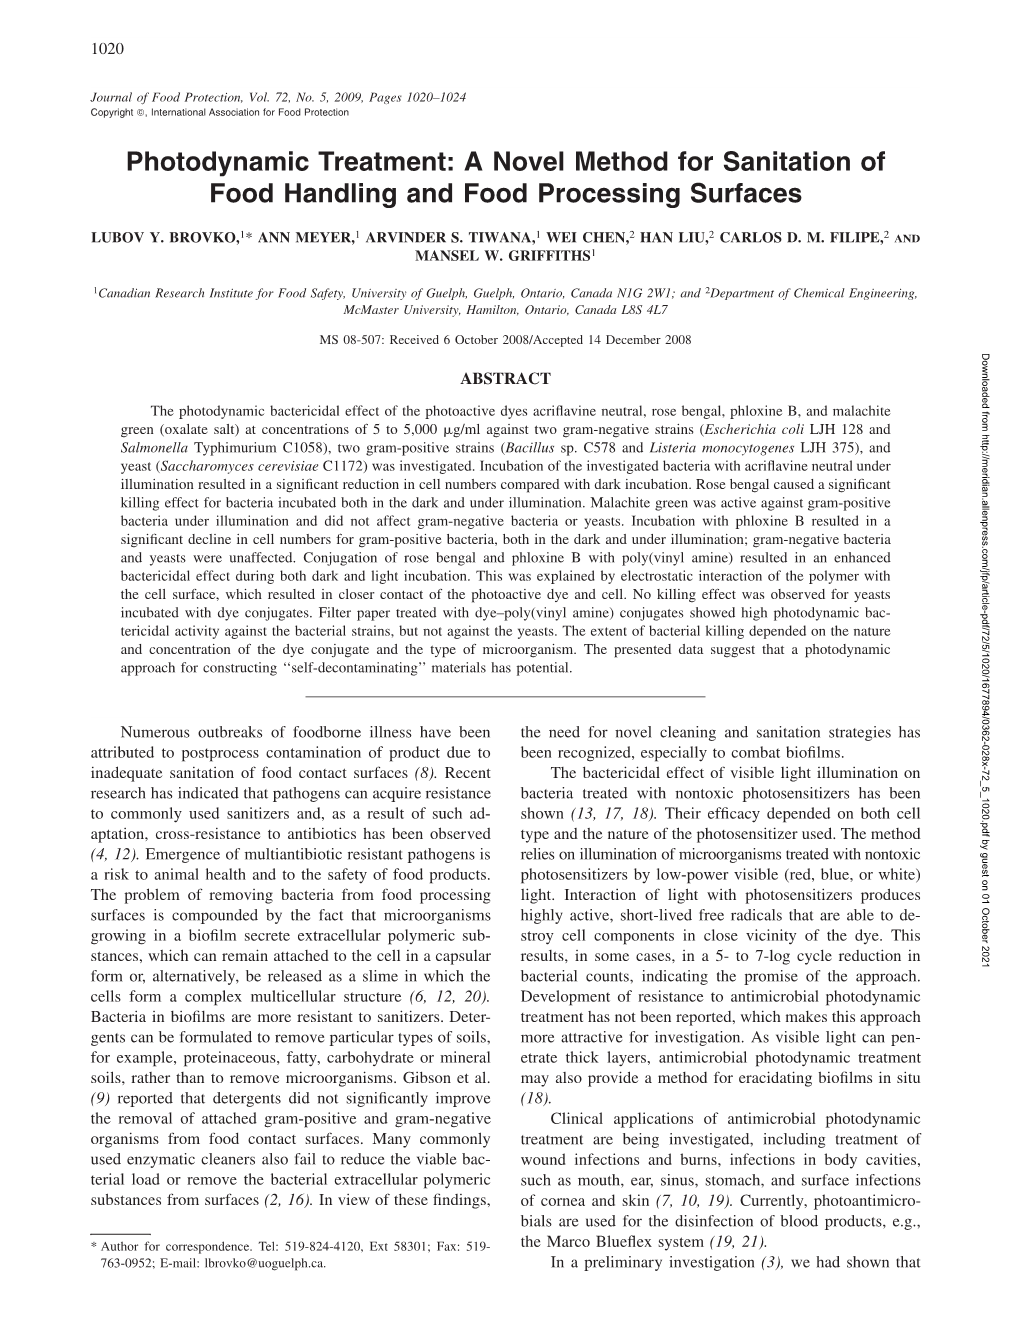 Photodynamic Treatment: a Novel Method for Sanitation of Food Handling and Food Processing Surfaces